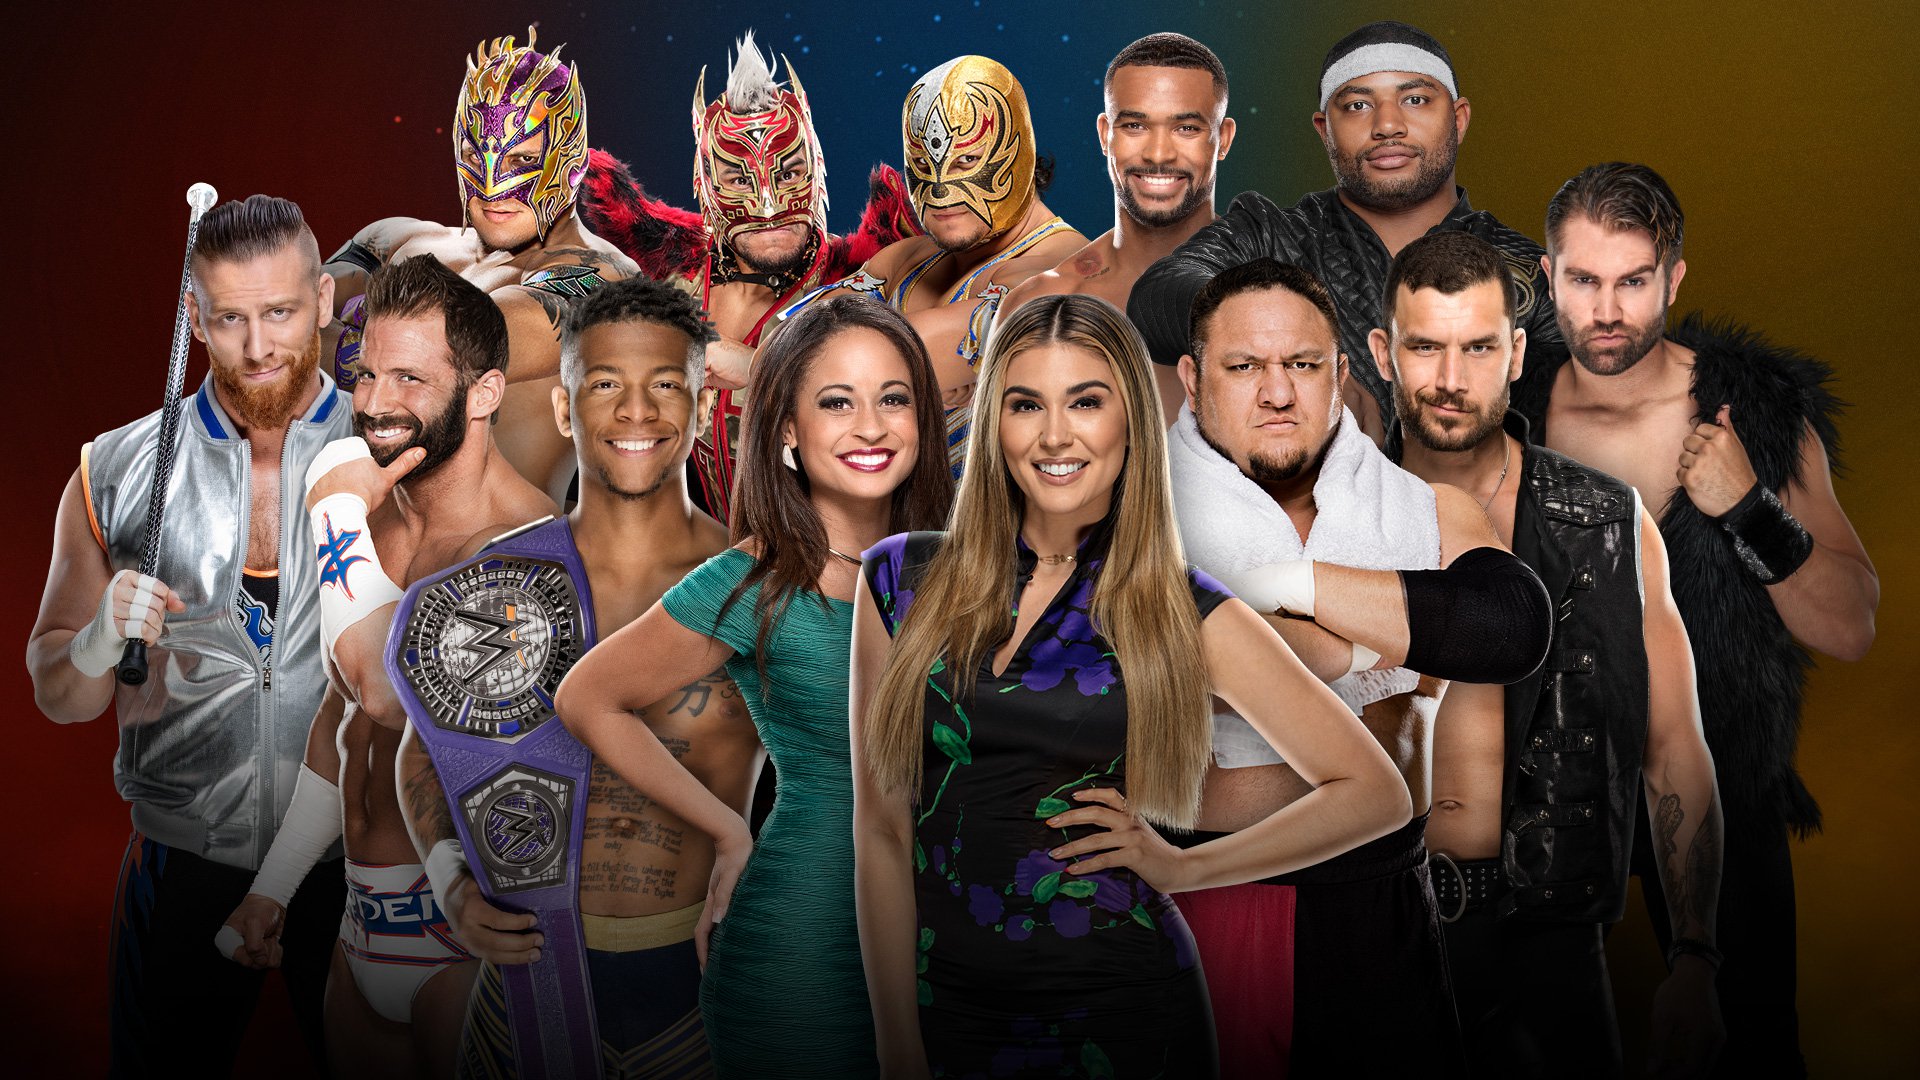 WWE Watch Along will stream live during Survivor Series on YouTube